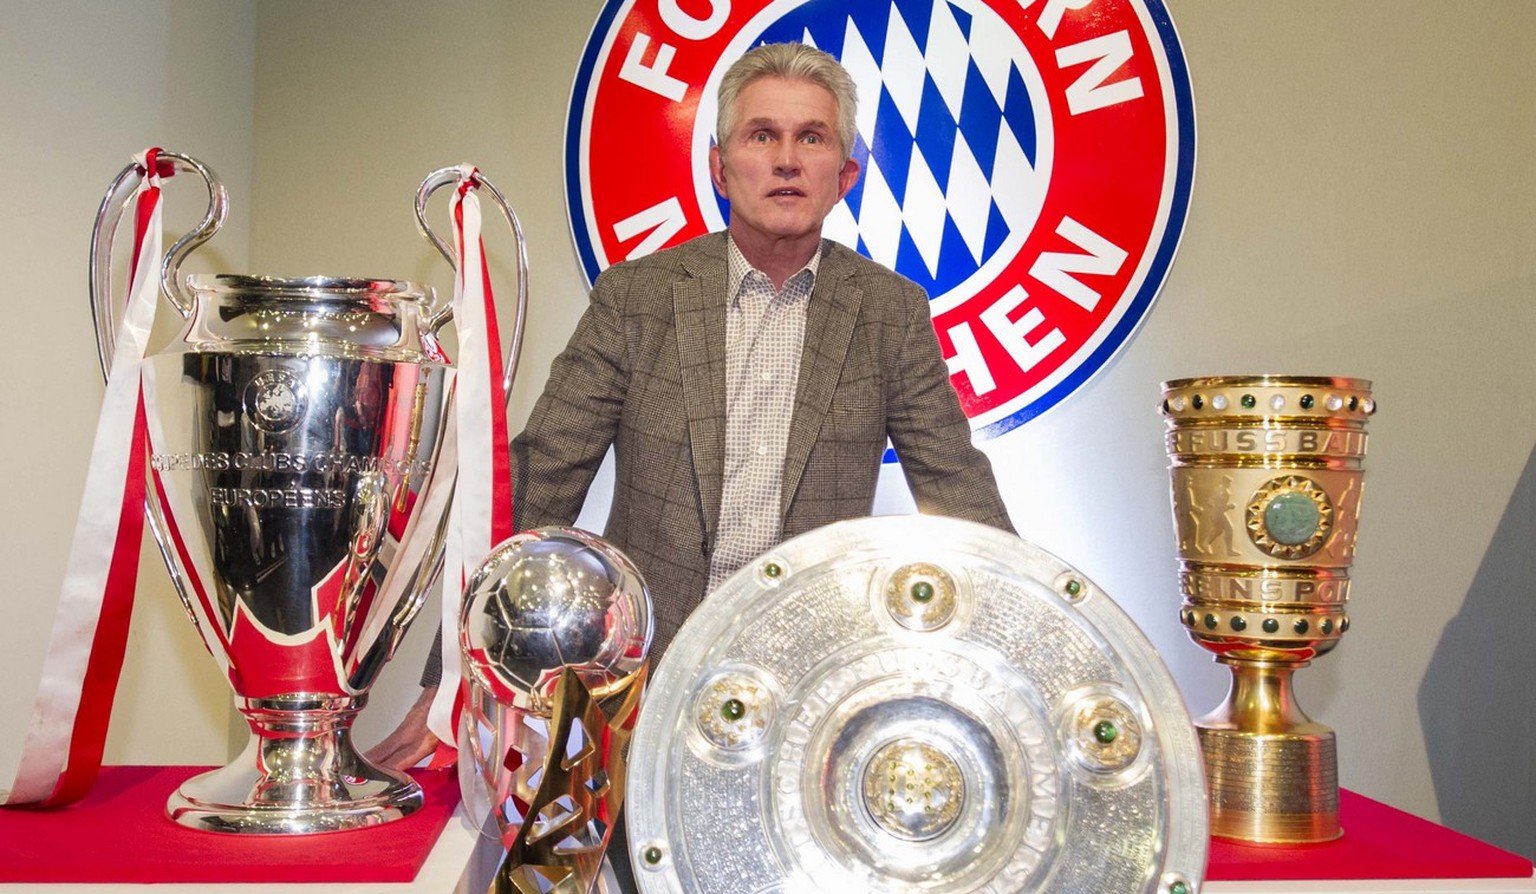 Head coach of Bundesliga soccer club Bayern Munich, Jupp Heynckes, poses with the trophies he and his team have won in the season 2012/2013 from left&gt; Champions League trophy, DFL Supercup trophy,  ...